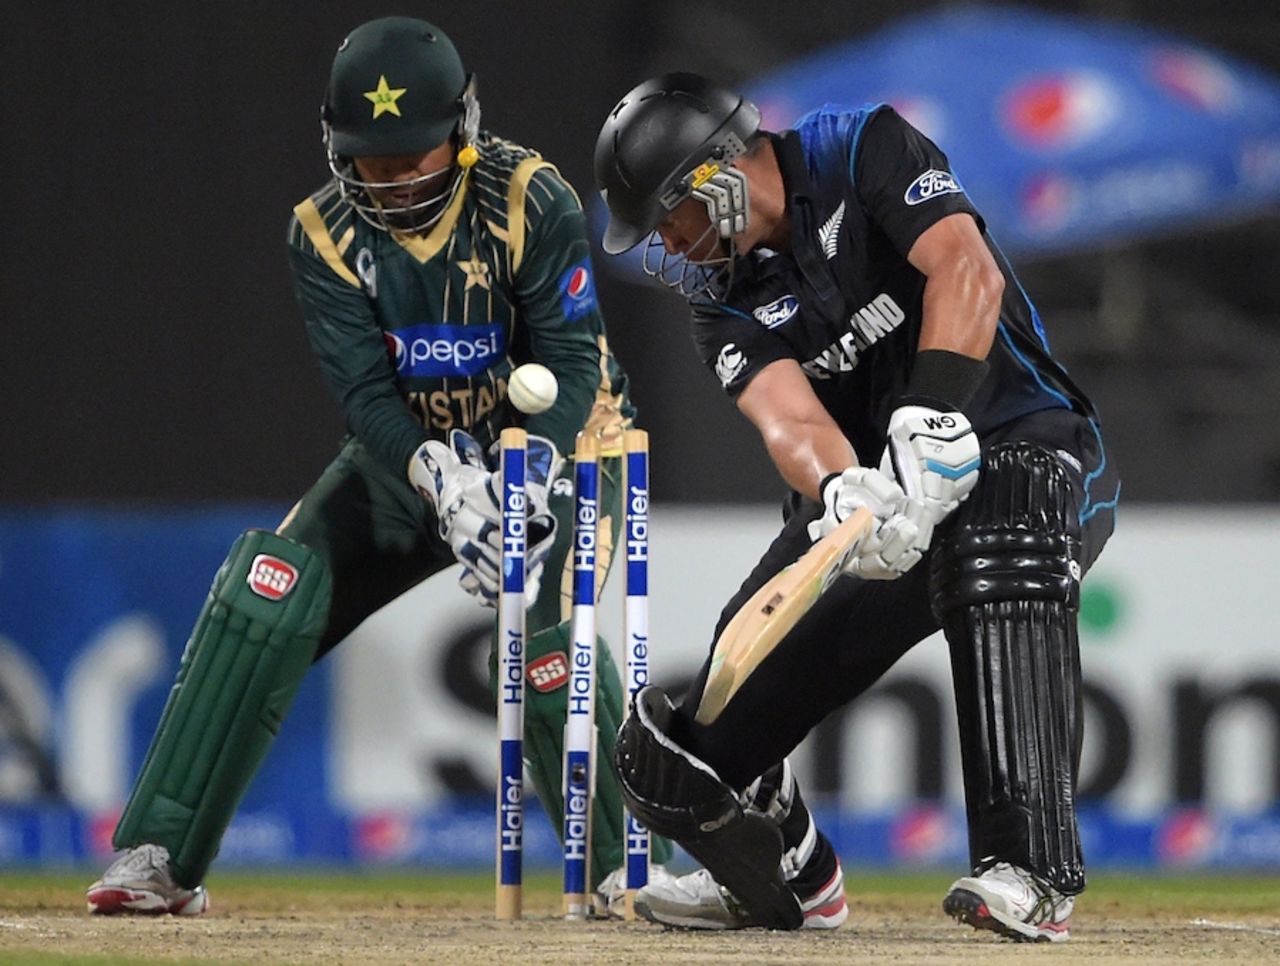 Ross Taylor's quick innings was ended by Shahid Afridi, Pakistan v New Zealand, 3rd ODI, Sharjah, December 14, 2014